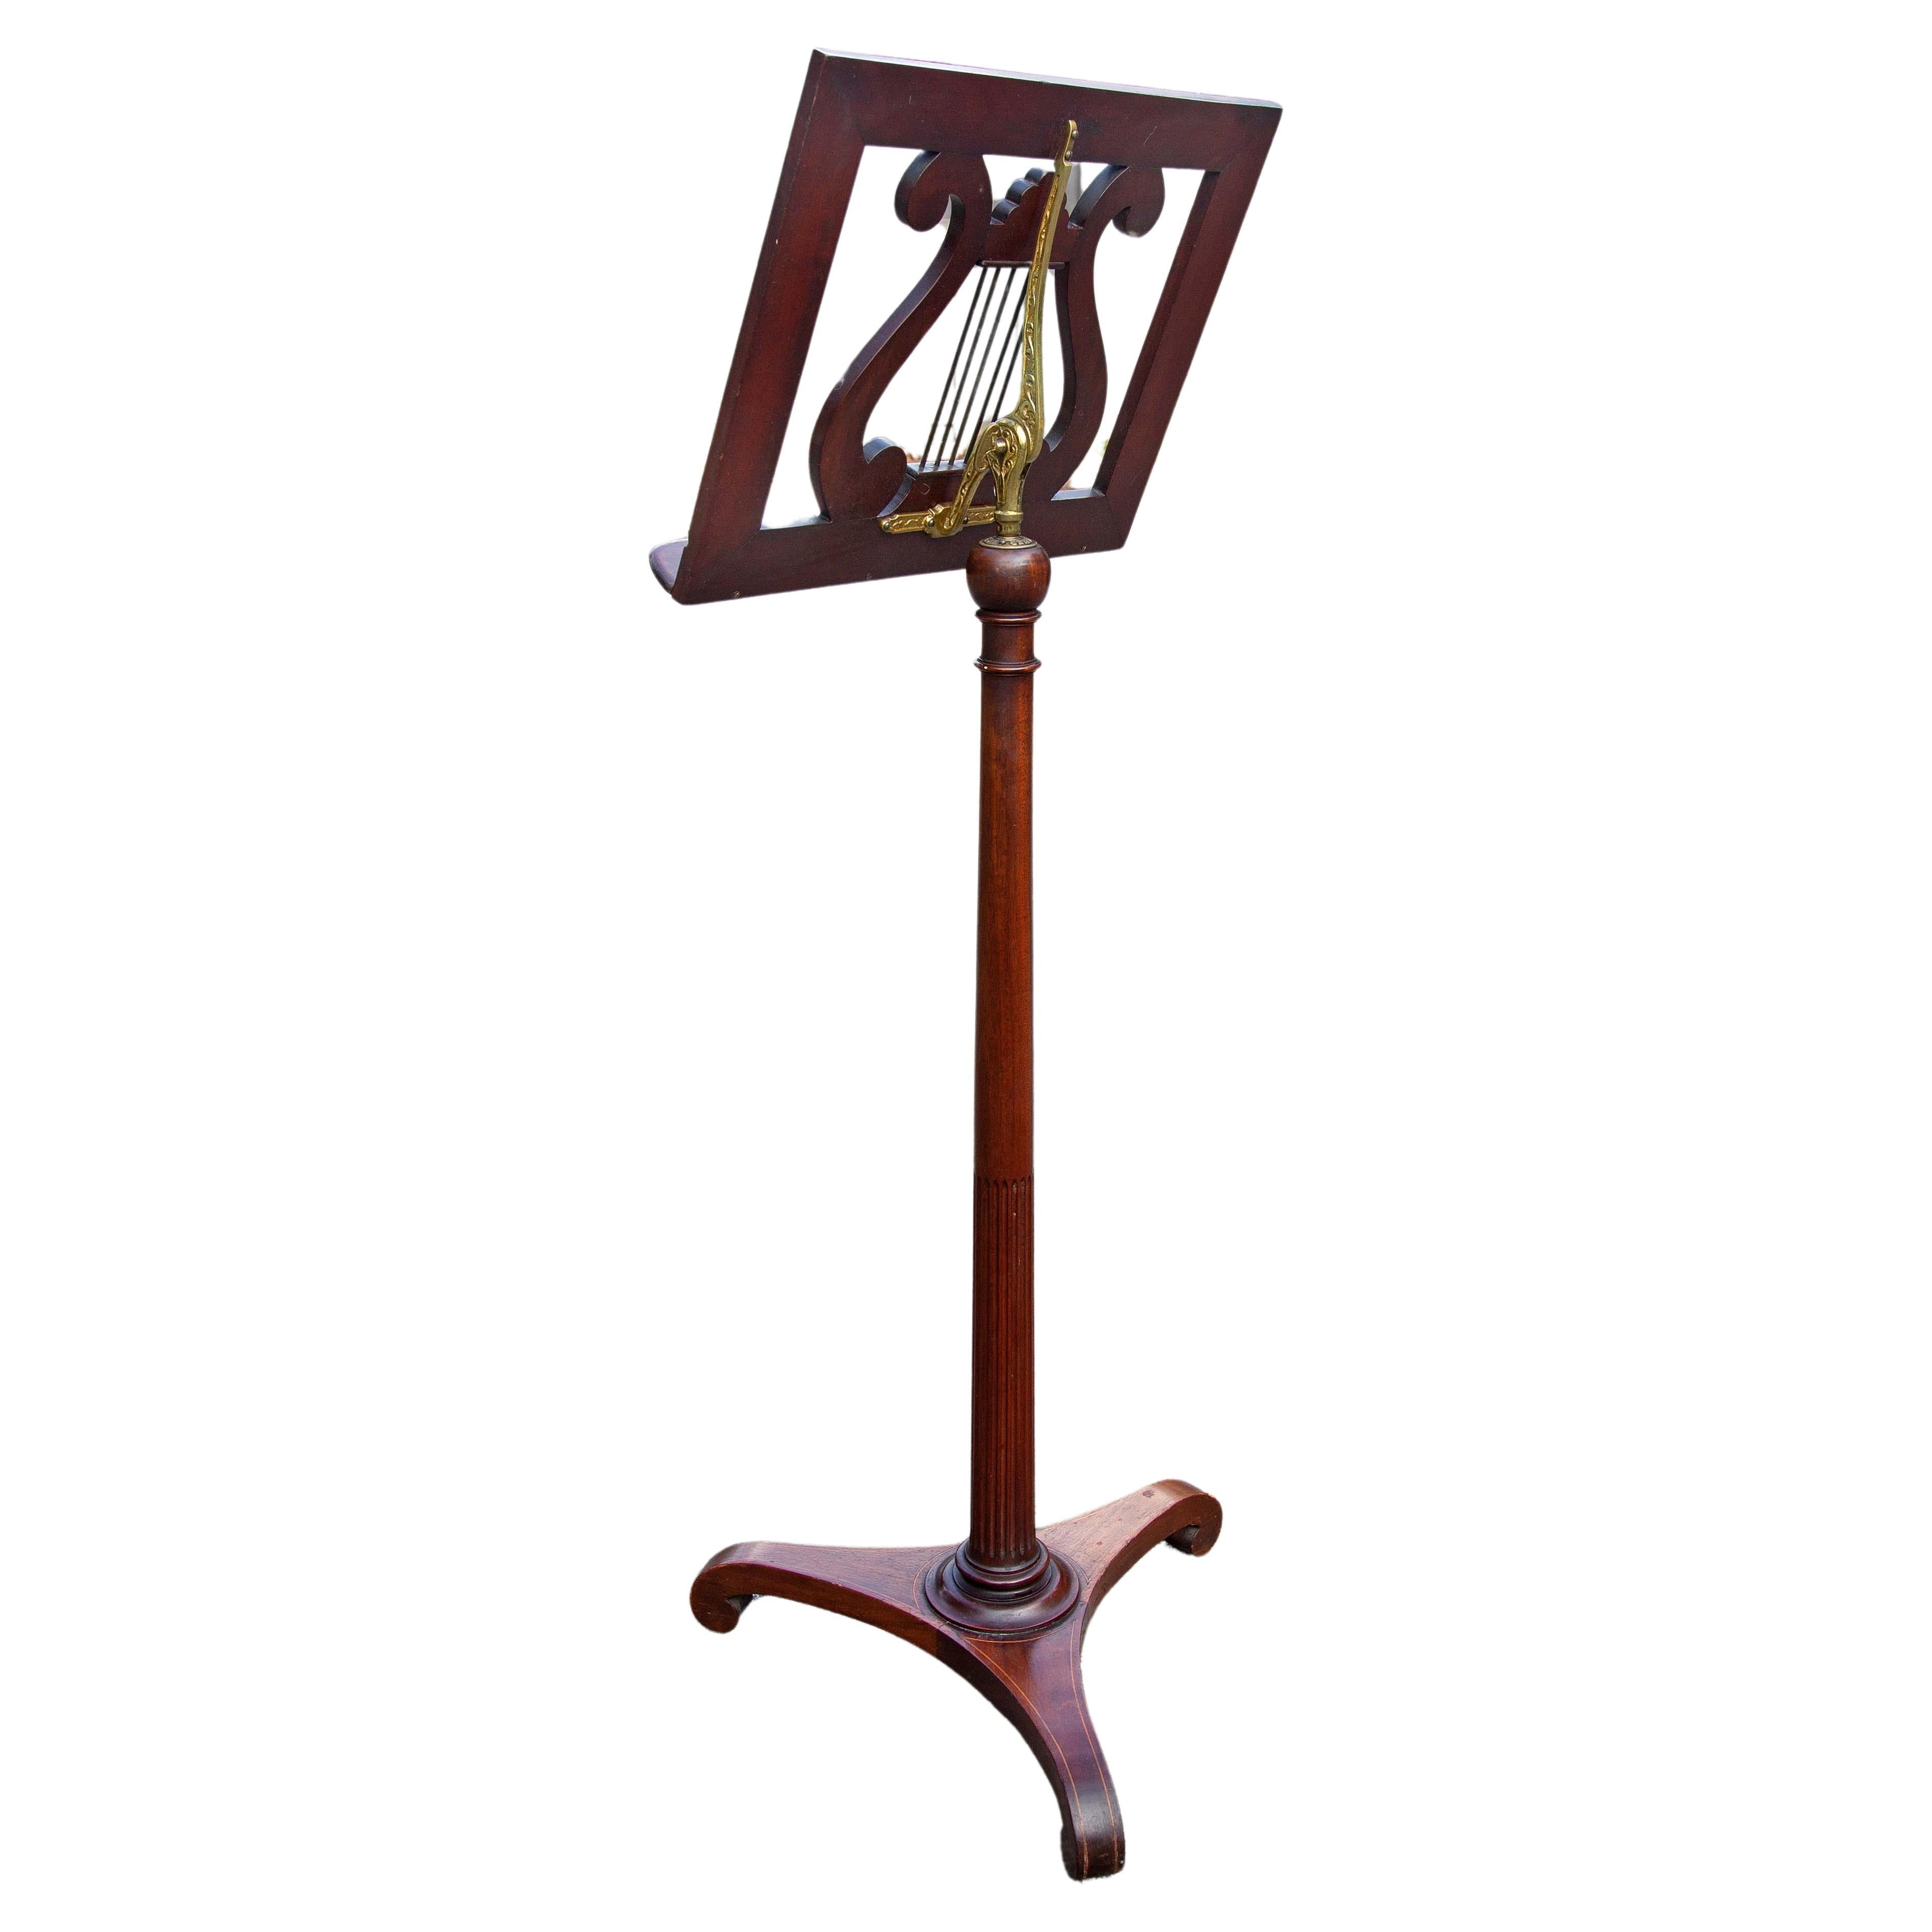 Classical mahogany and brass music stand by Palmer, NY. Adjustable. Circa 1900.